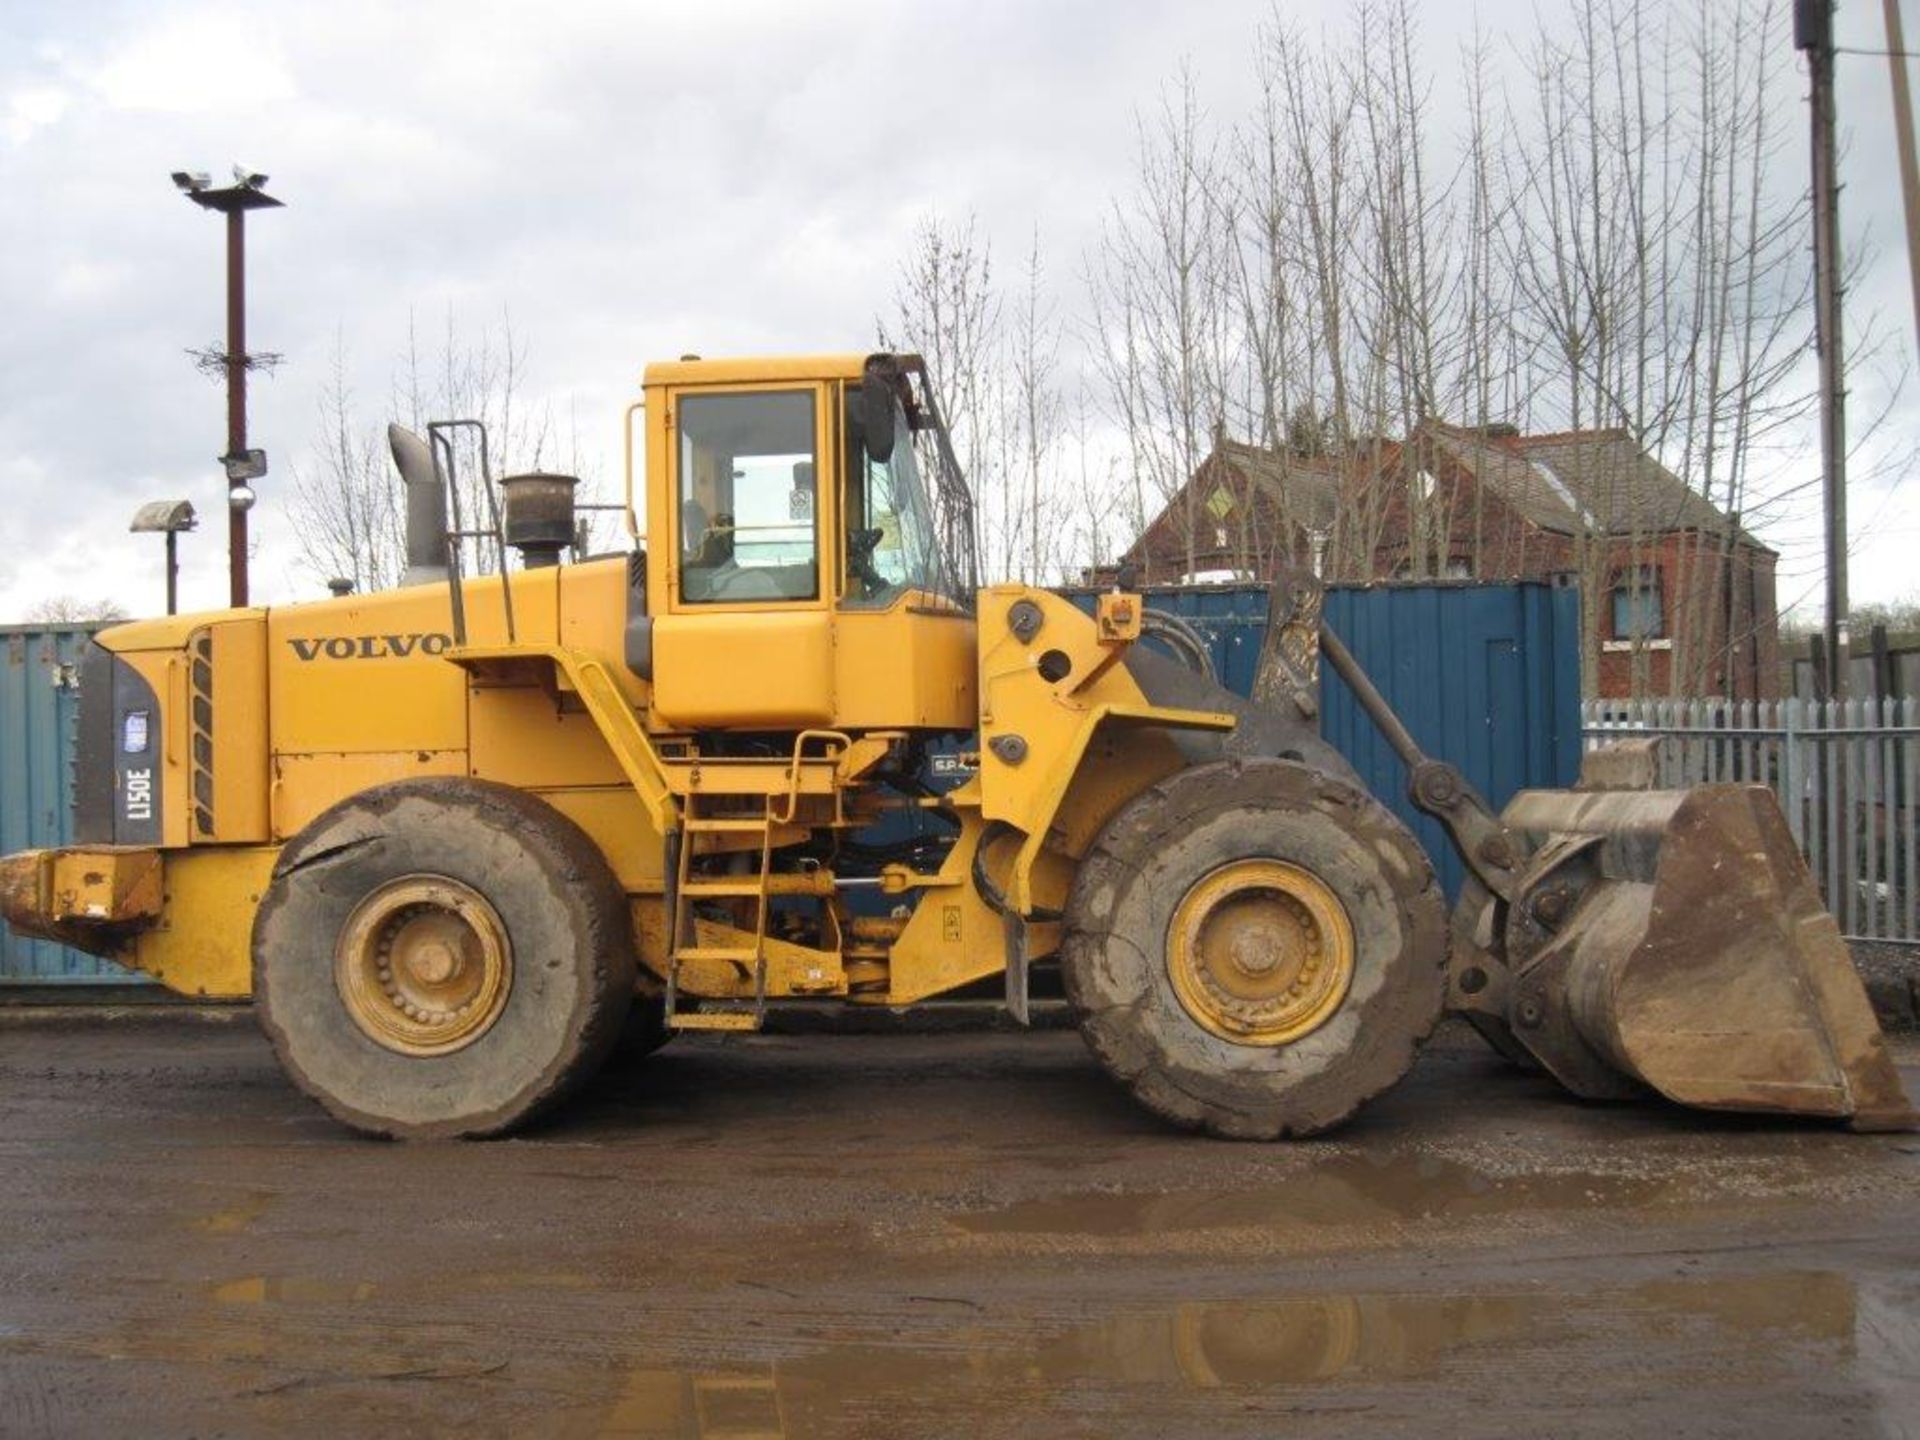 Volvo L150e Loading Shovel 2005, very good condition, original paint and well maintained